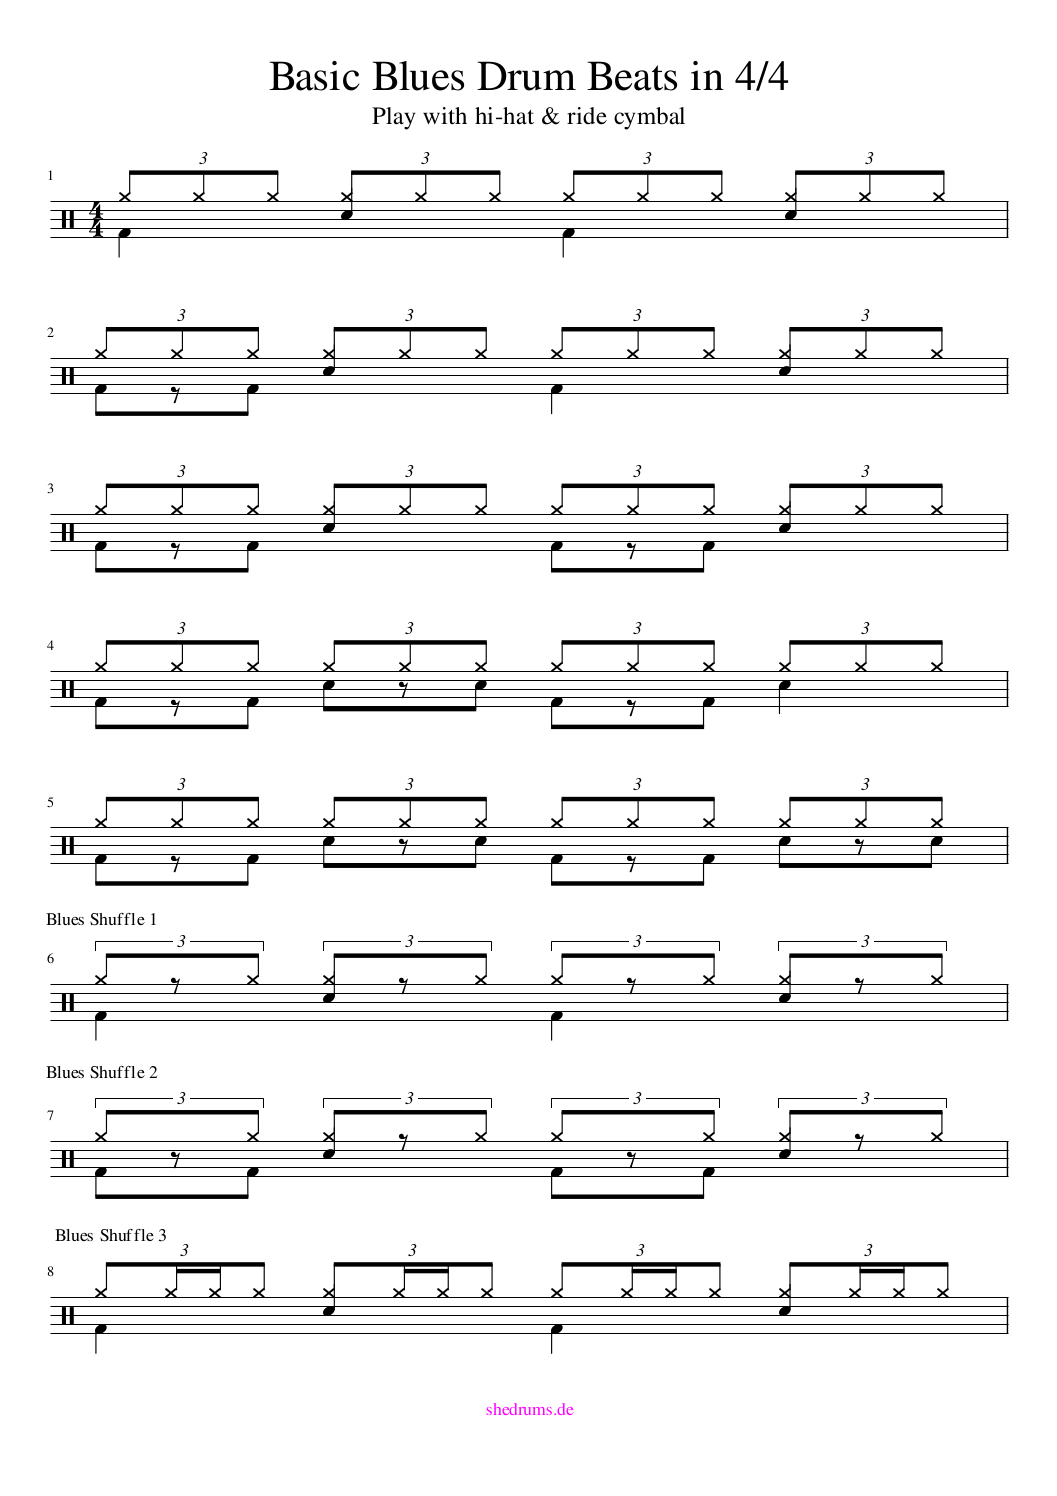 7 Easy Blues Drum Beats For Starters (+ Free Notes) - sHe druMs: Rock ...